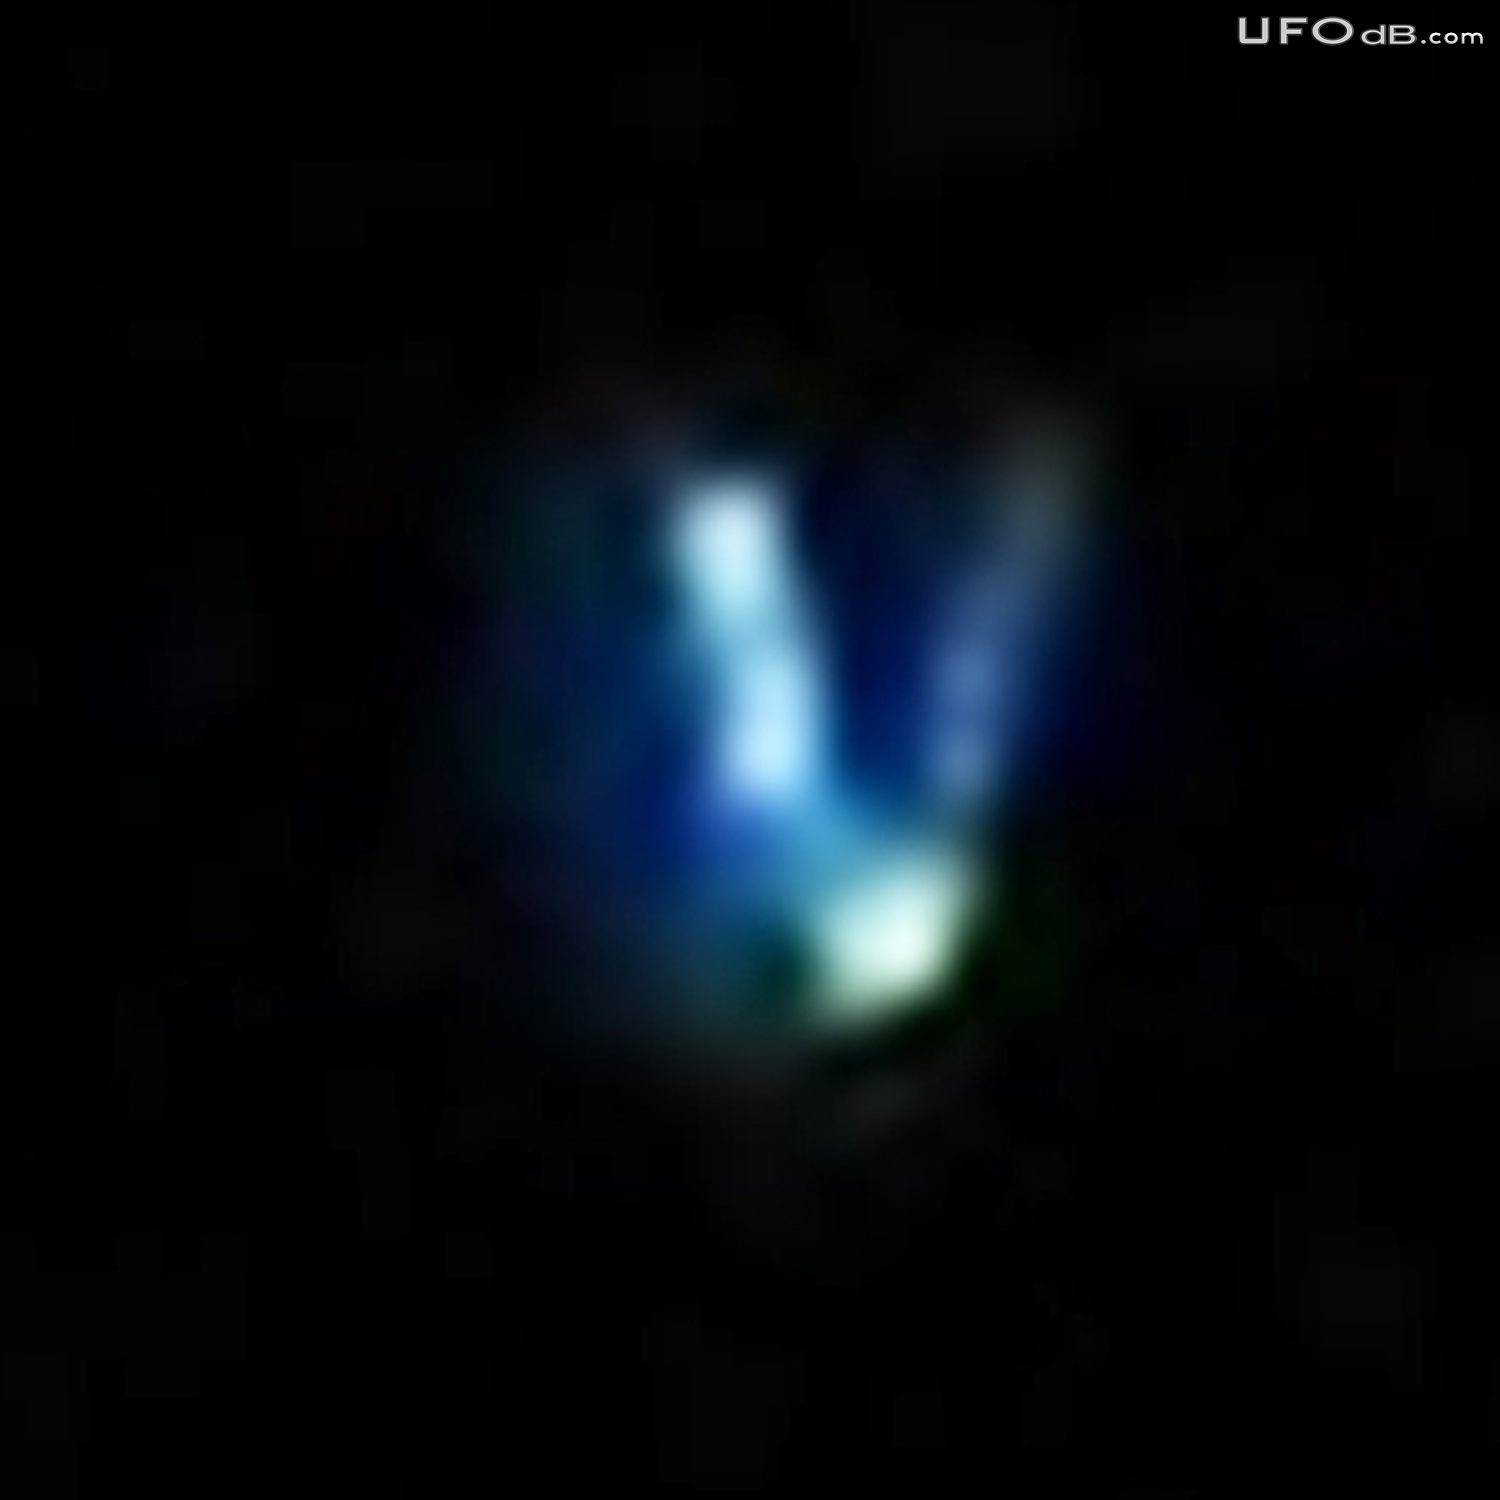 Alien Space Station taken on picture | Alberta Canada | January 2011 UFO Picture #270-3